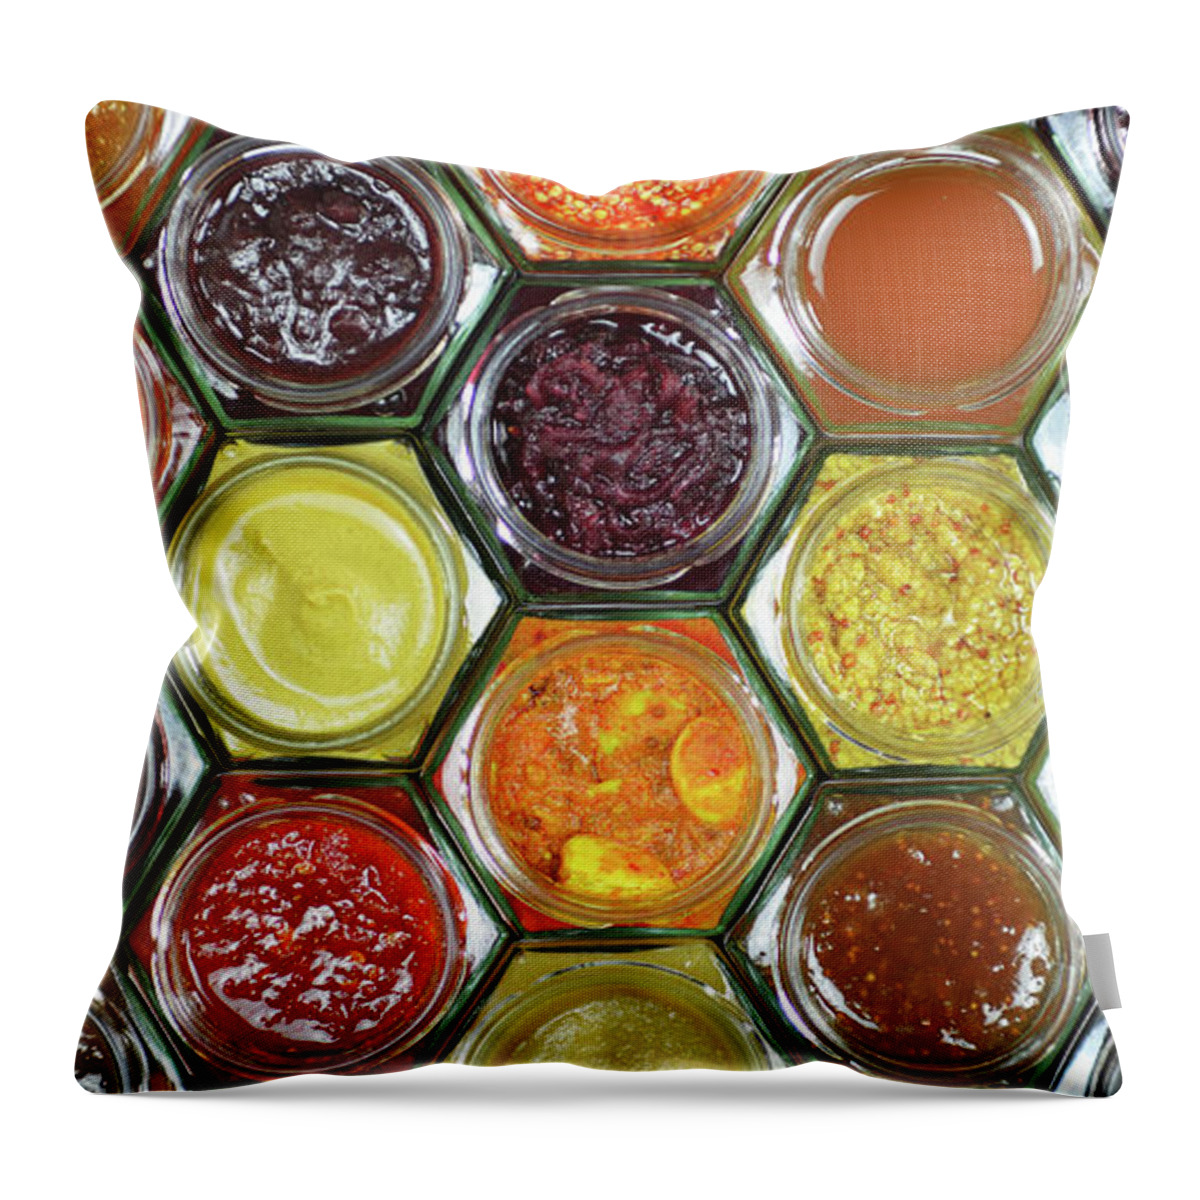 Chutney Throw Pillow featuring the photograph A Selection Of Cumbrian Preserves by Alan Spedding